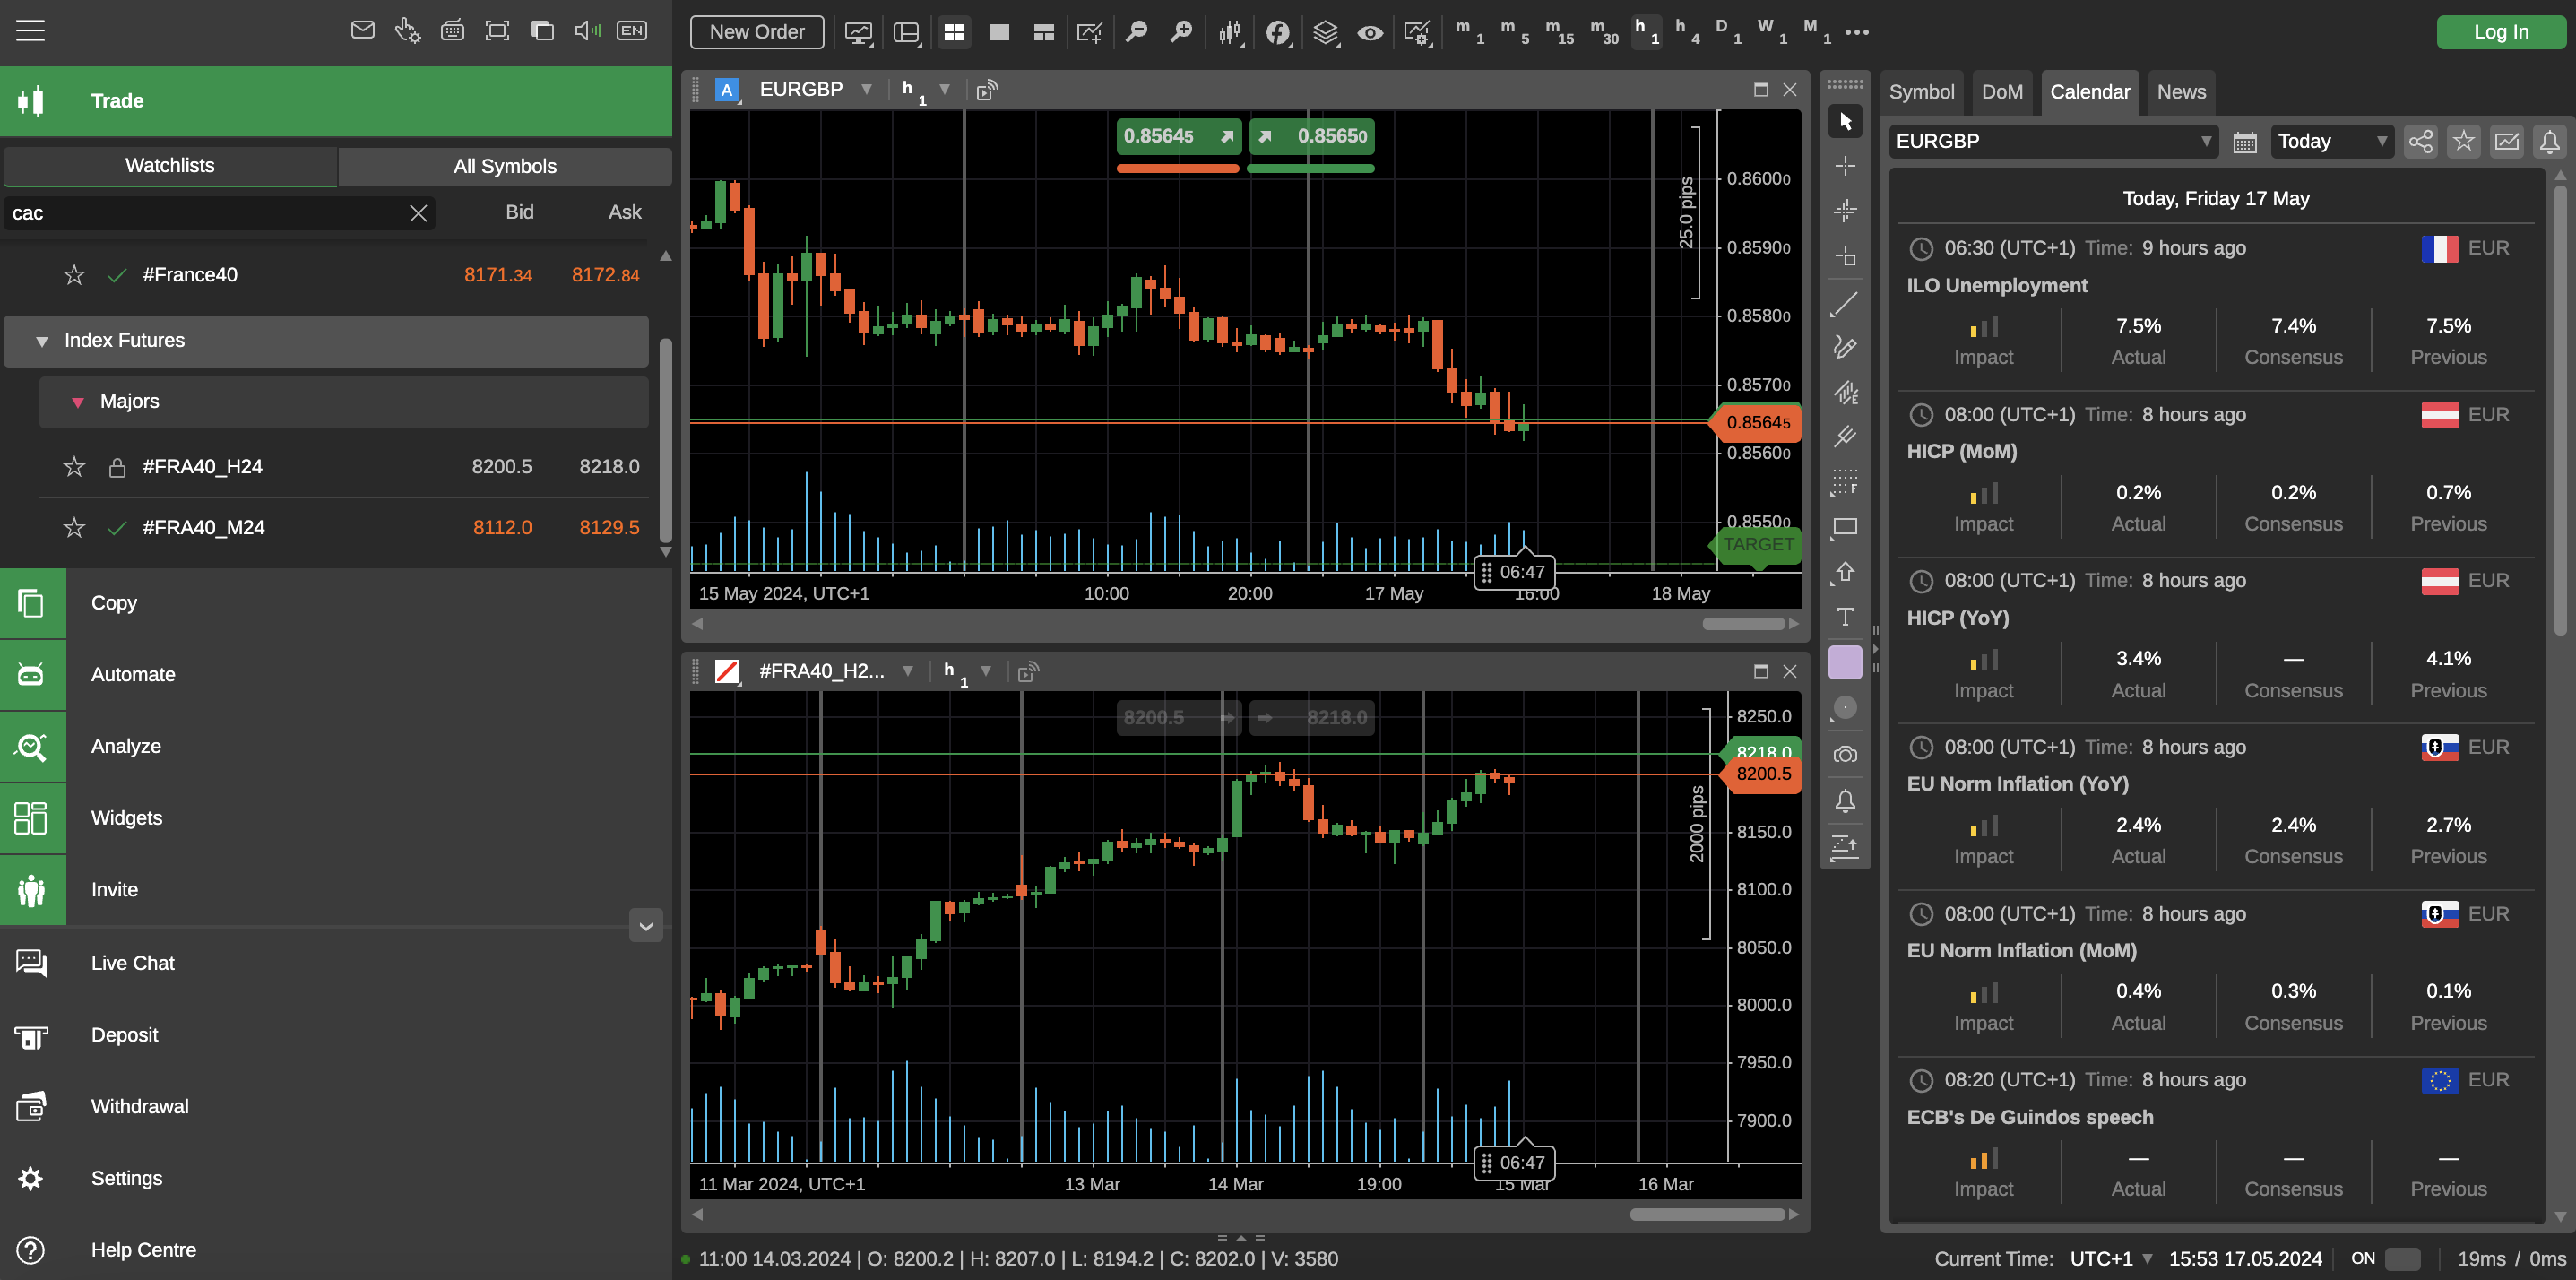 cTrader terminal at FxPro, showing EURGBP and FRA40 charts